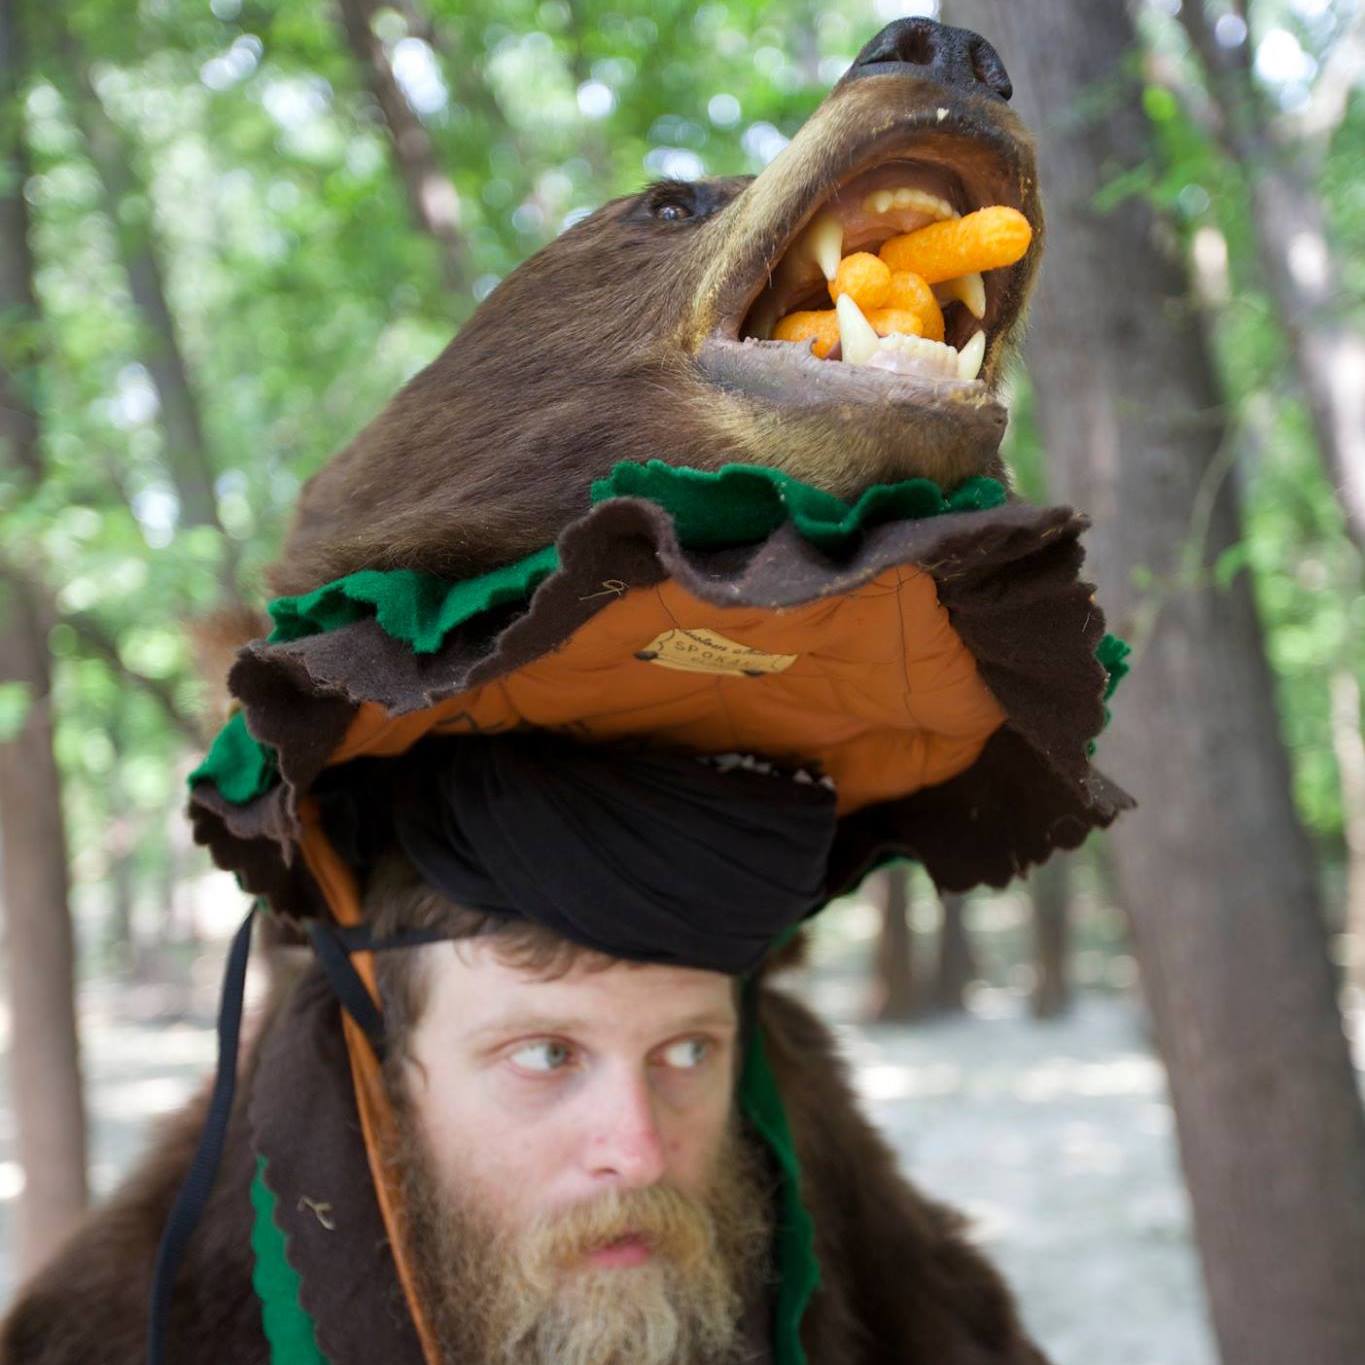 A person wearing a bear head hat with cheese puffs in the mouth, with trees in the background